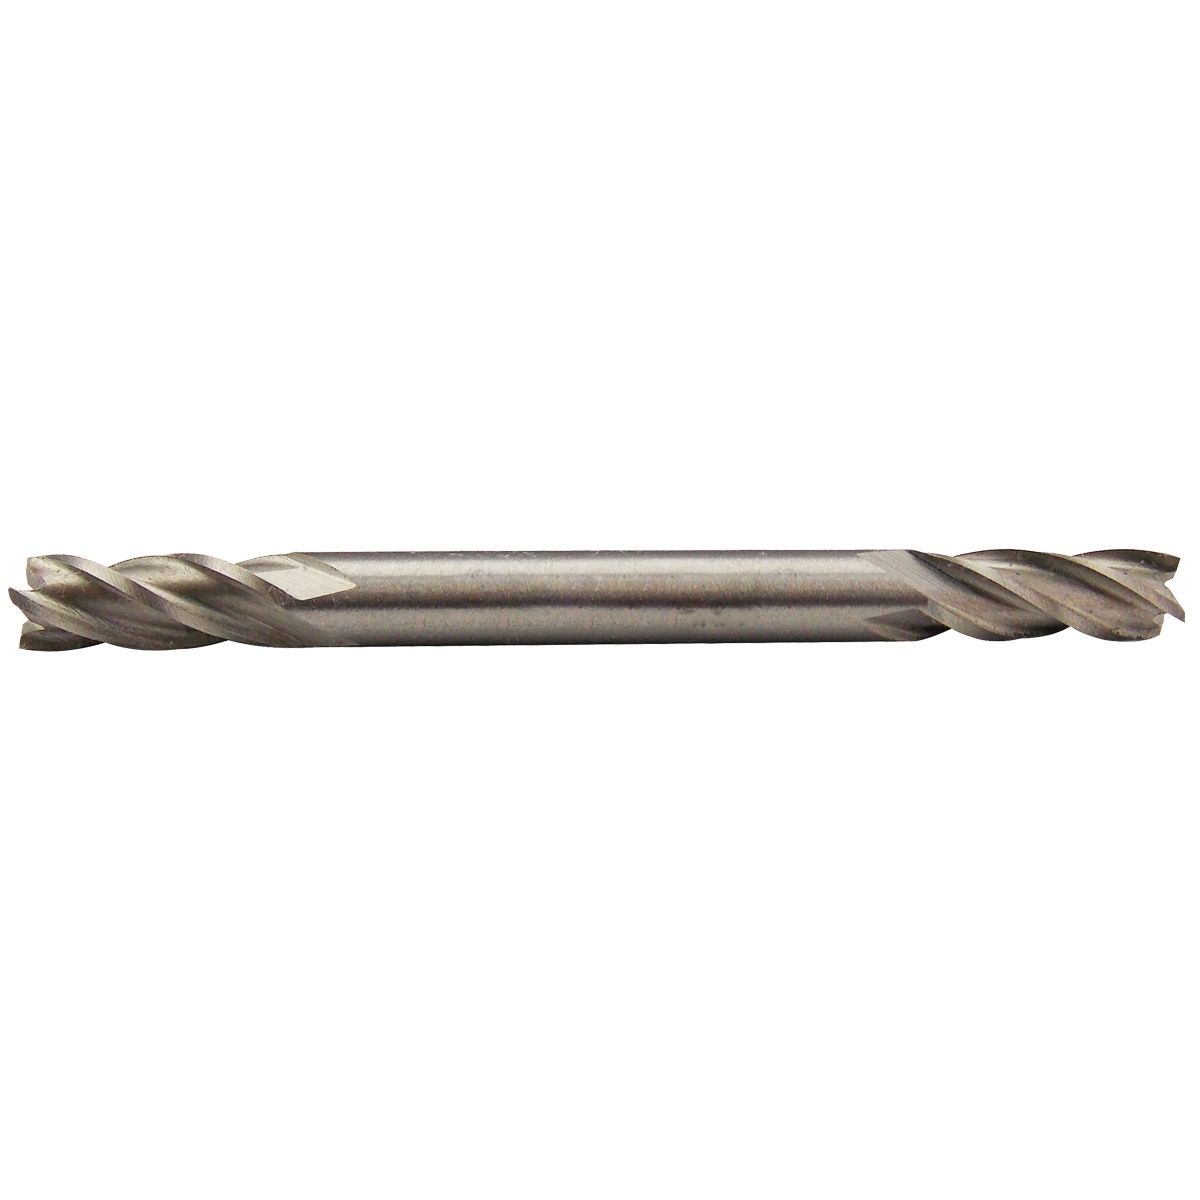 5/64" 4 FLUTE MINI HIGH SPEED STEEL DOUBLE END END MILL (5831-0020)